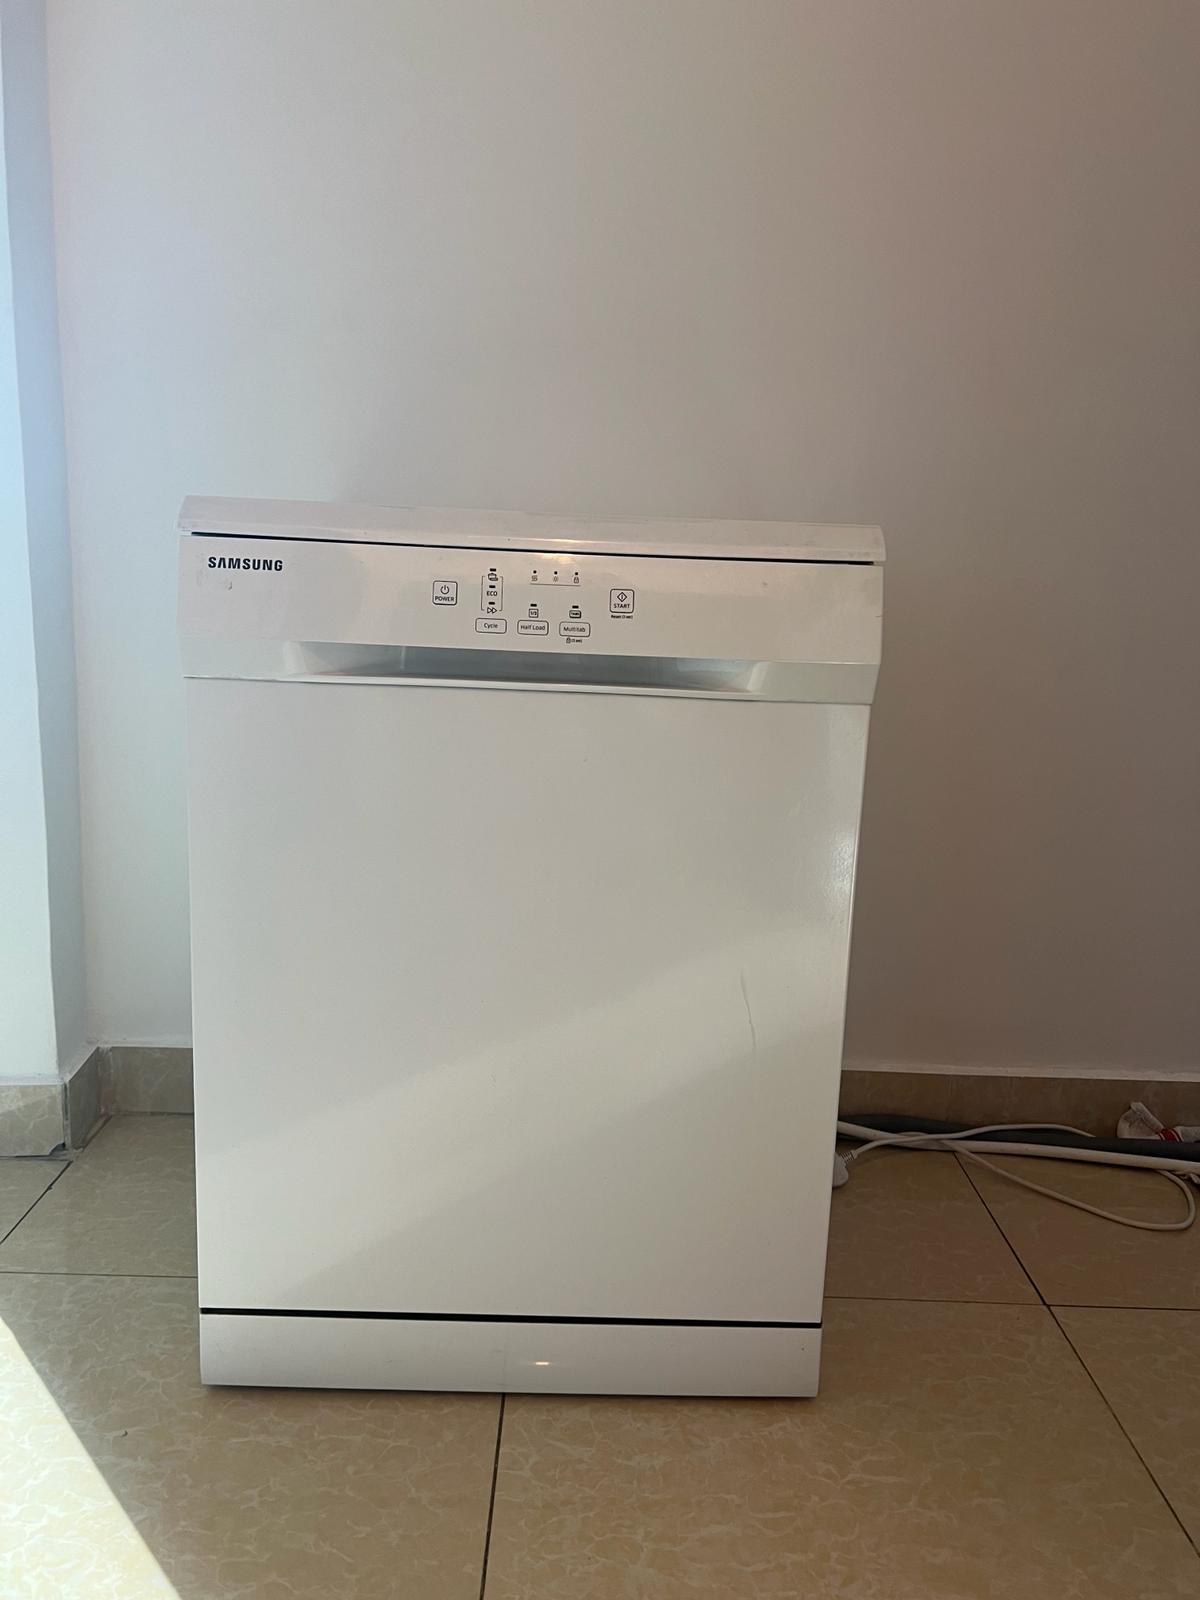 Good Condition Samsung Dish Washer for Sale